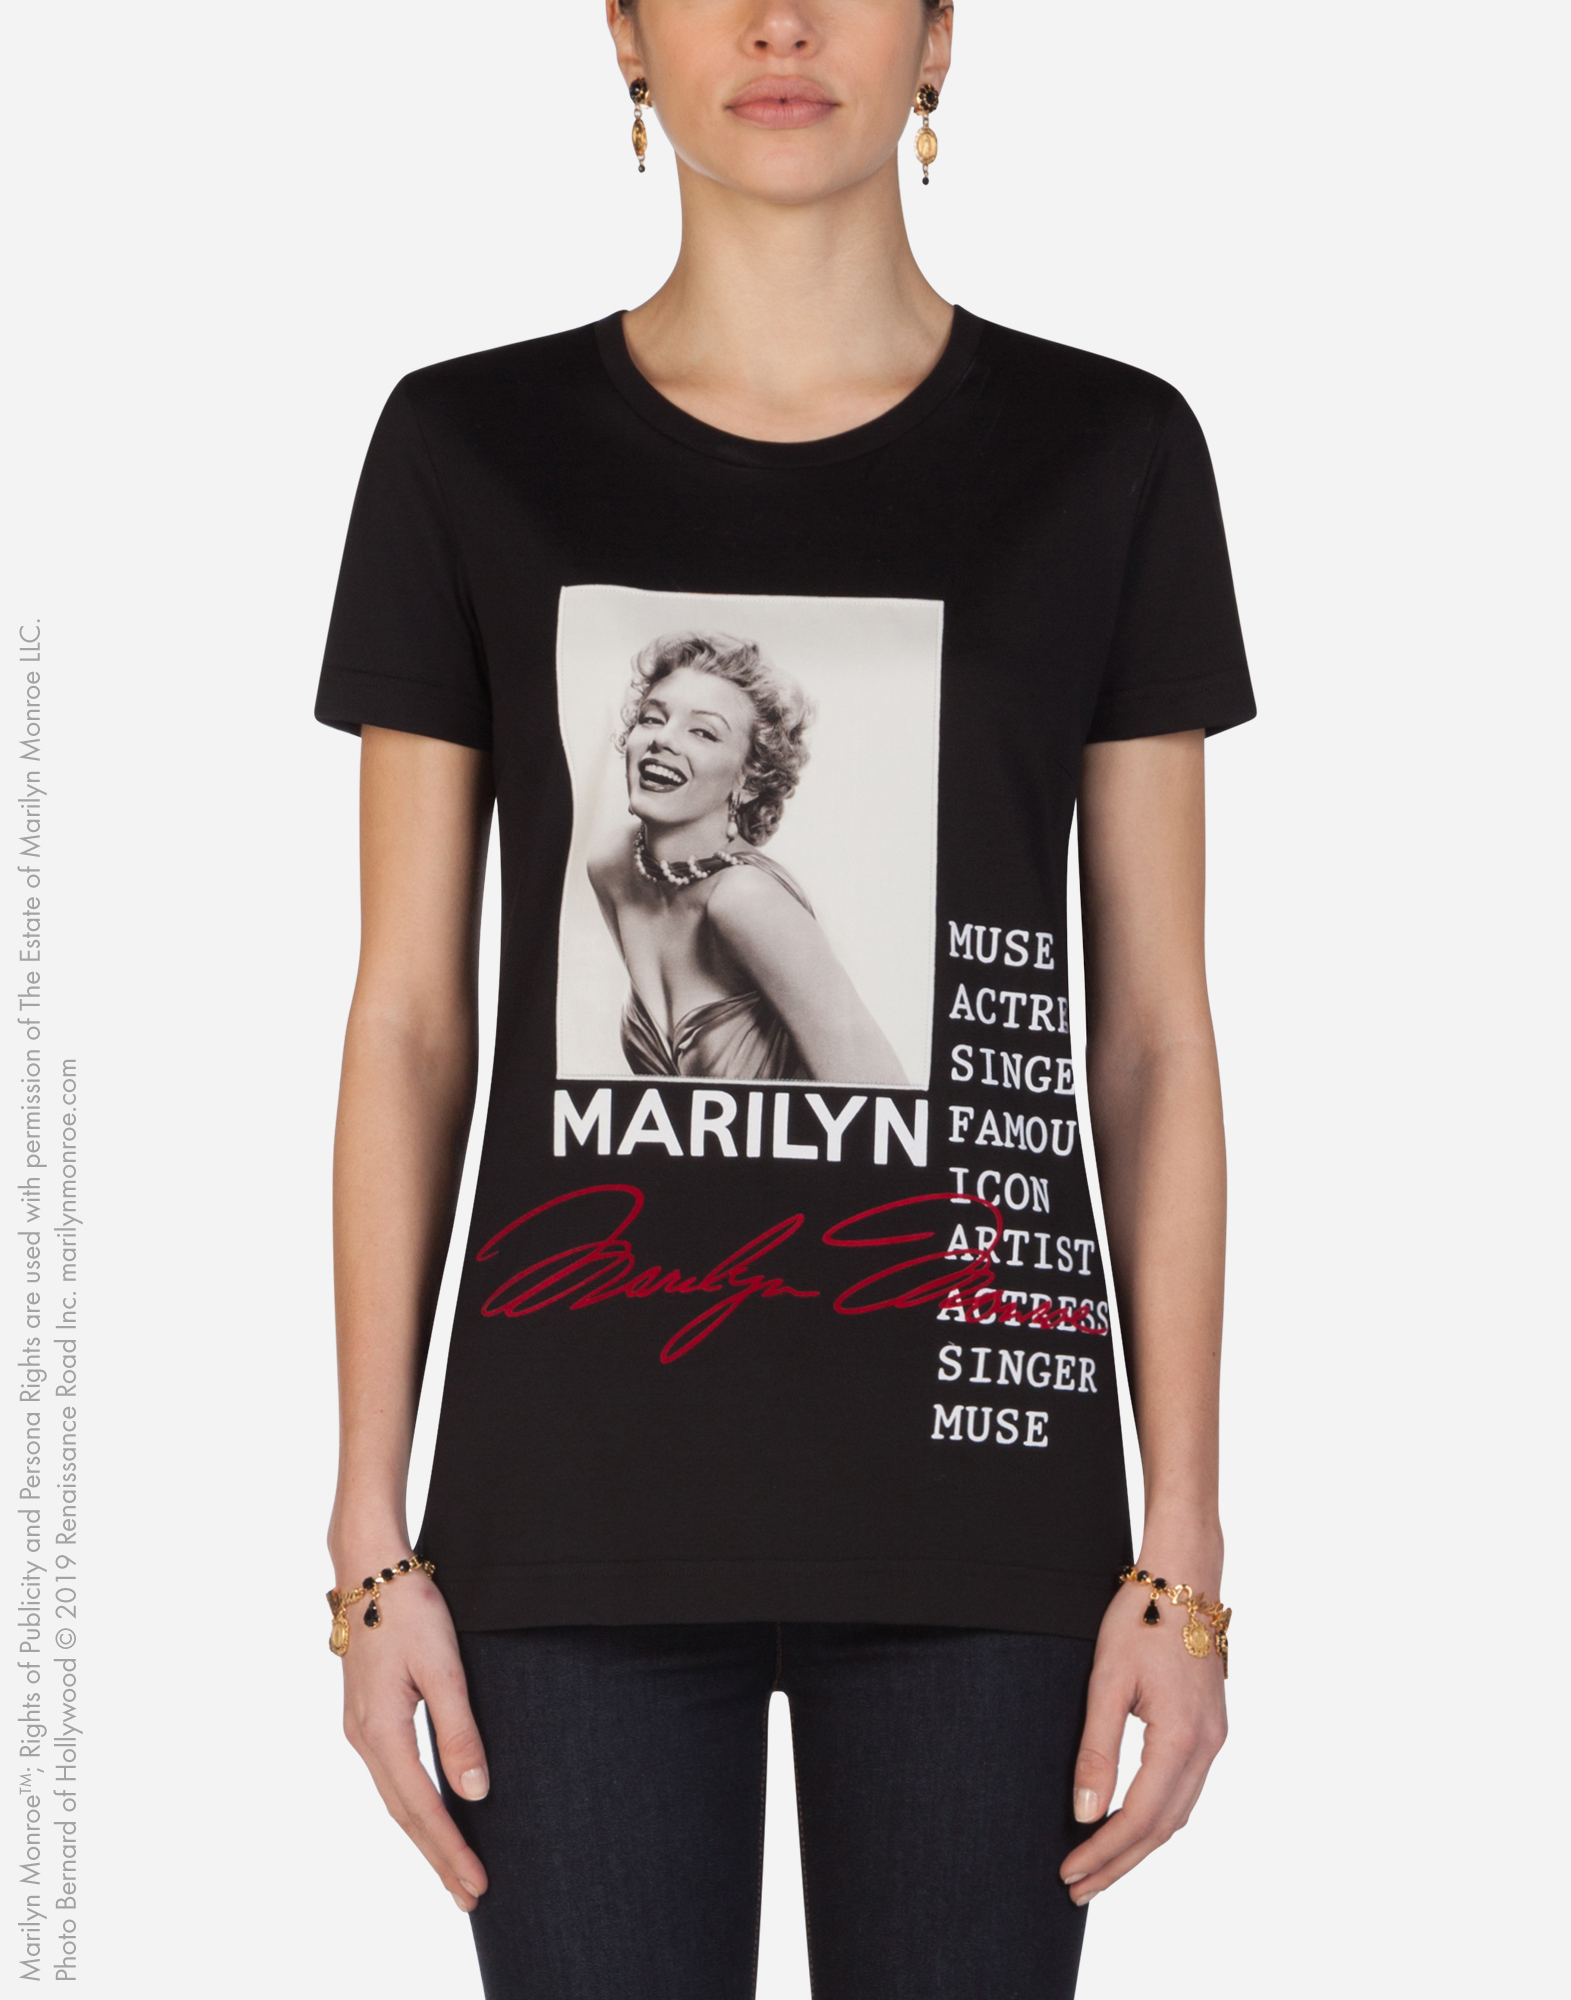 DOLCE & GABBANA JERSEY T-SHIRT WITH MARILYN MONROE PRINT AND EMBROIDERY